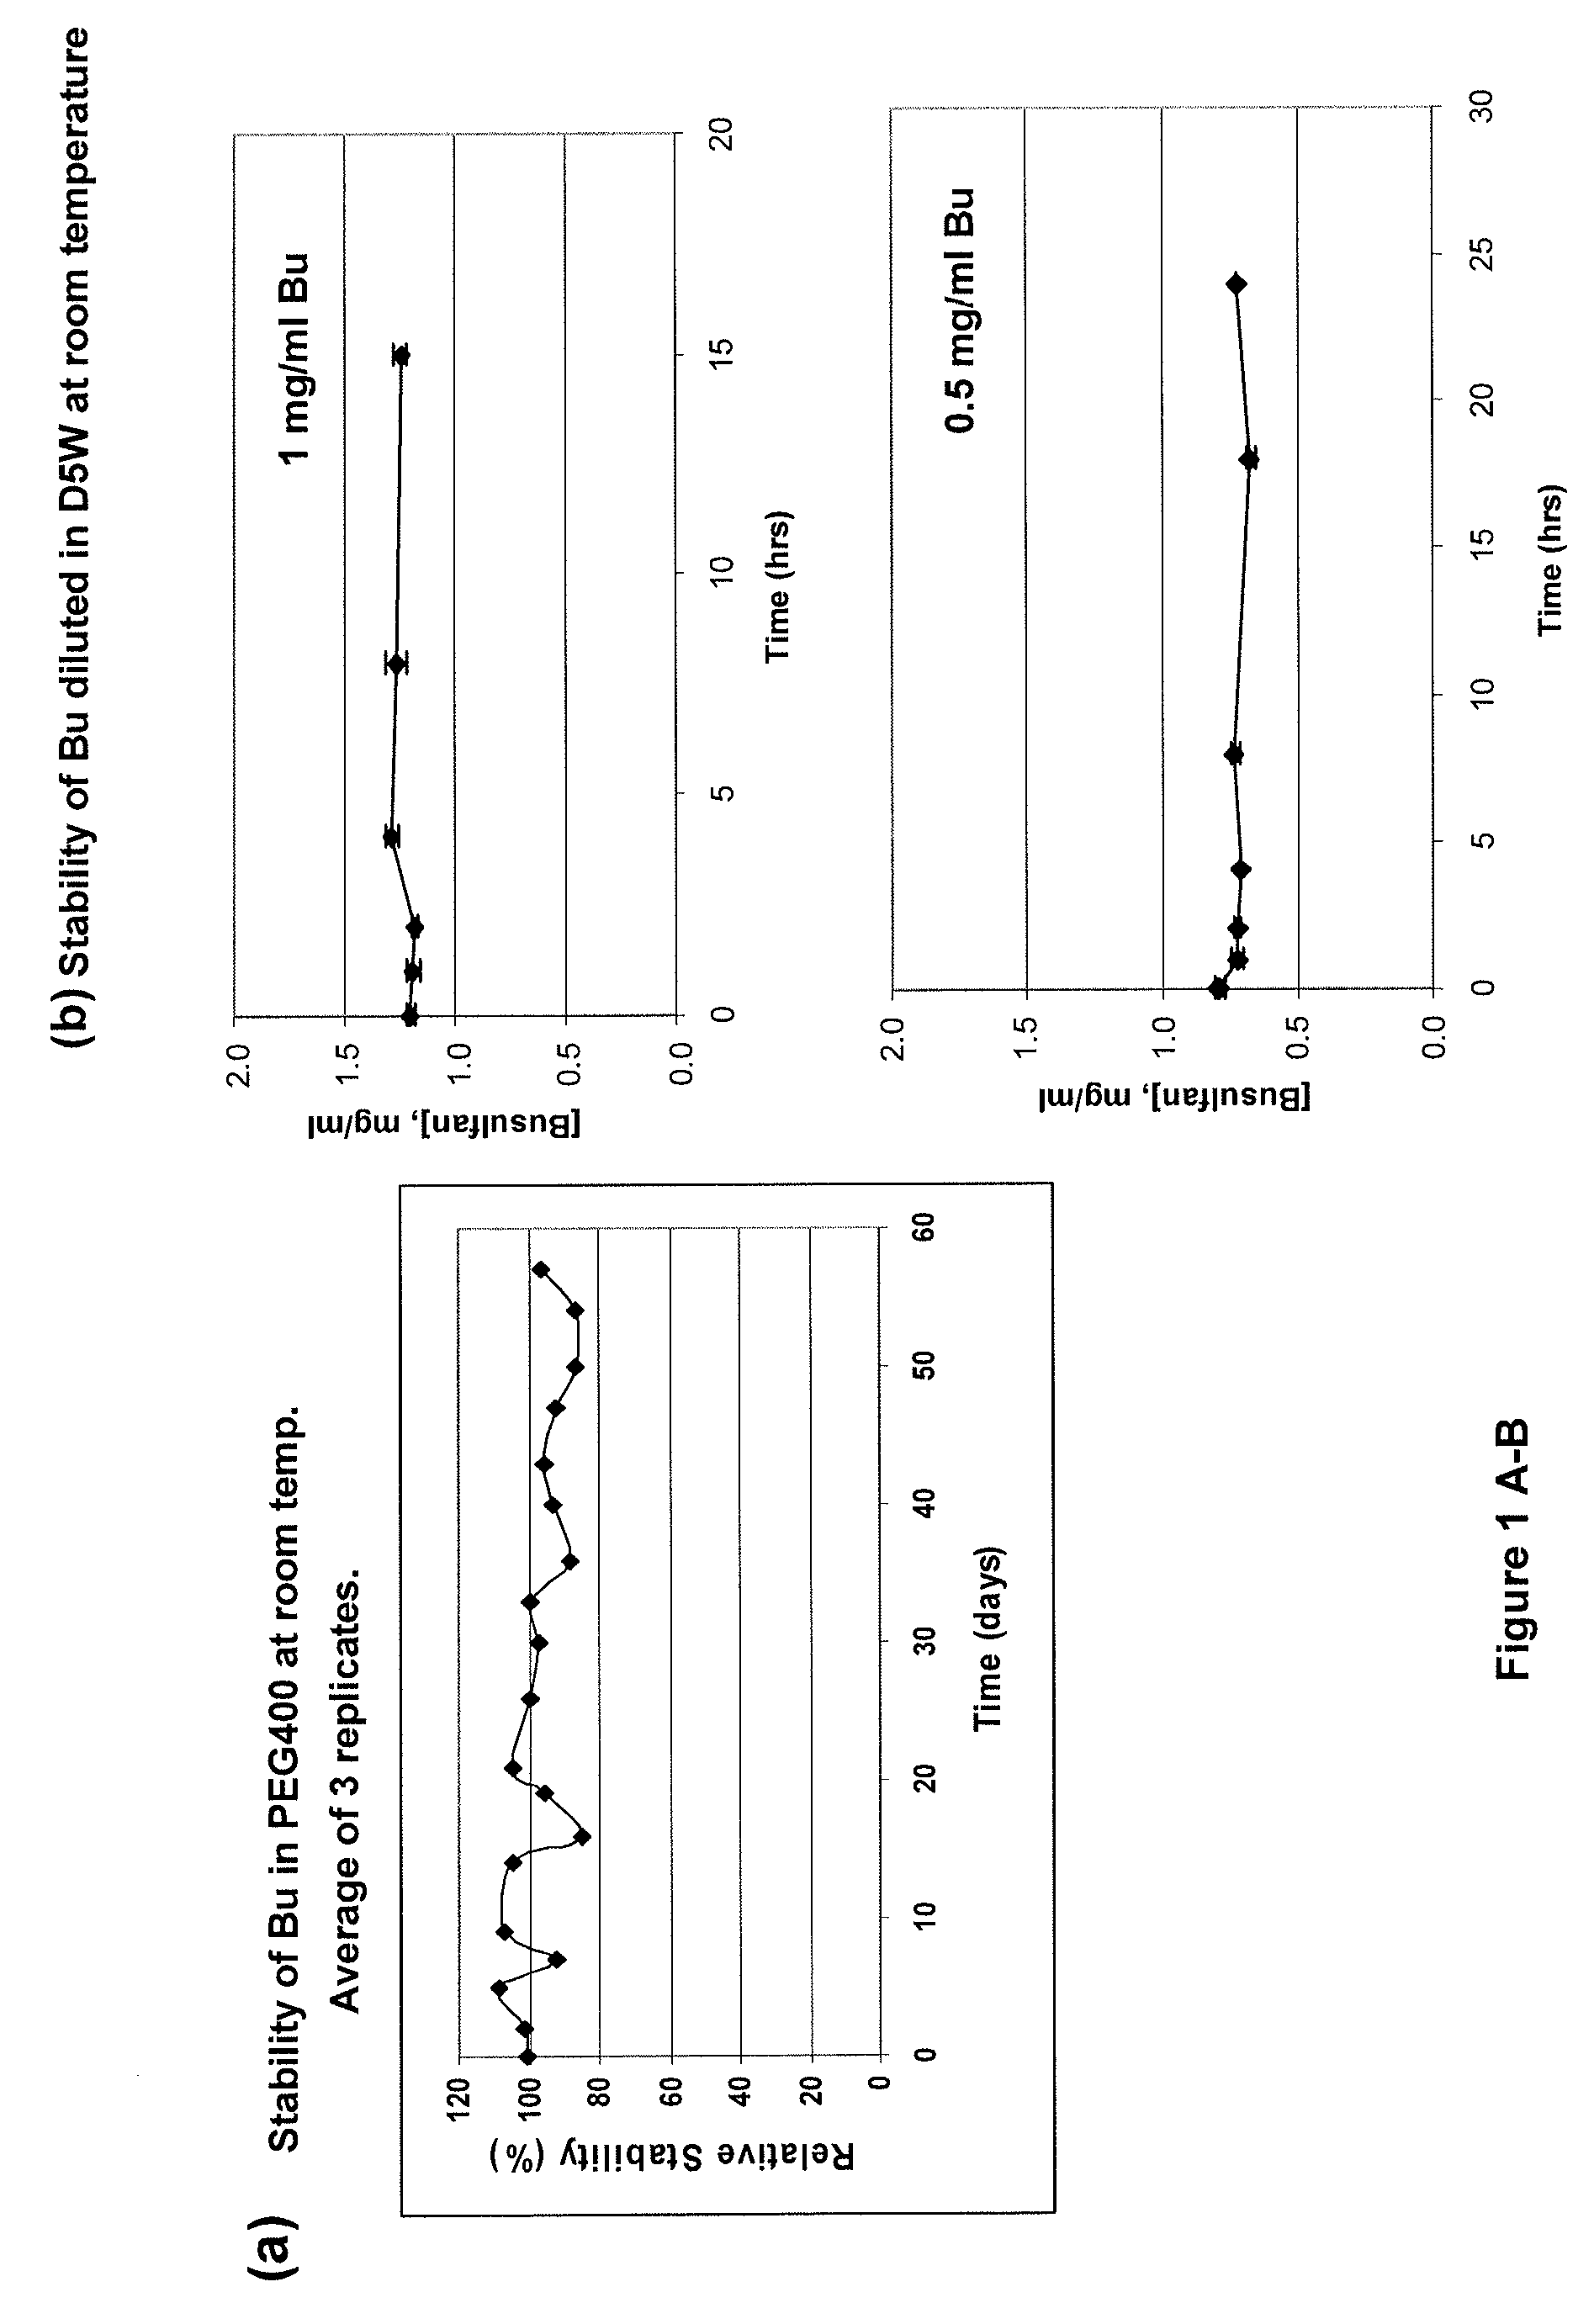 Parenteral formulations of lipophilic pharmaceutical agents and methods for preparing and using the same